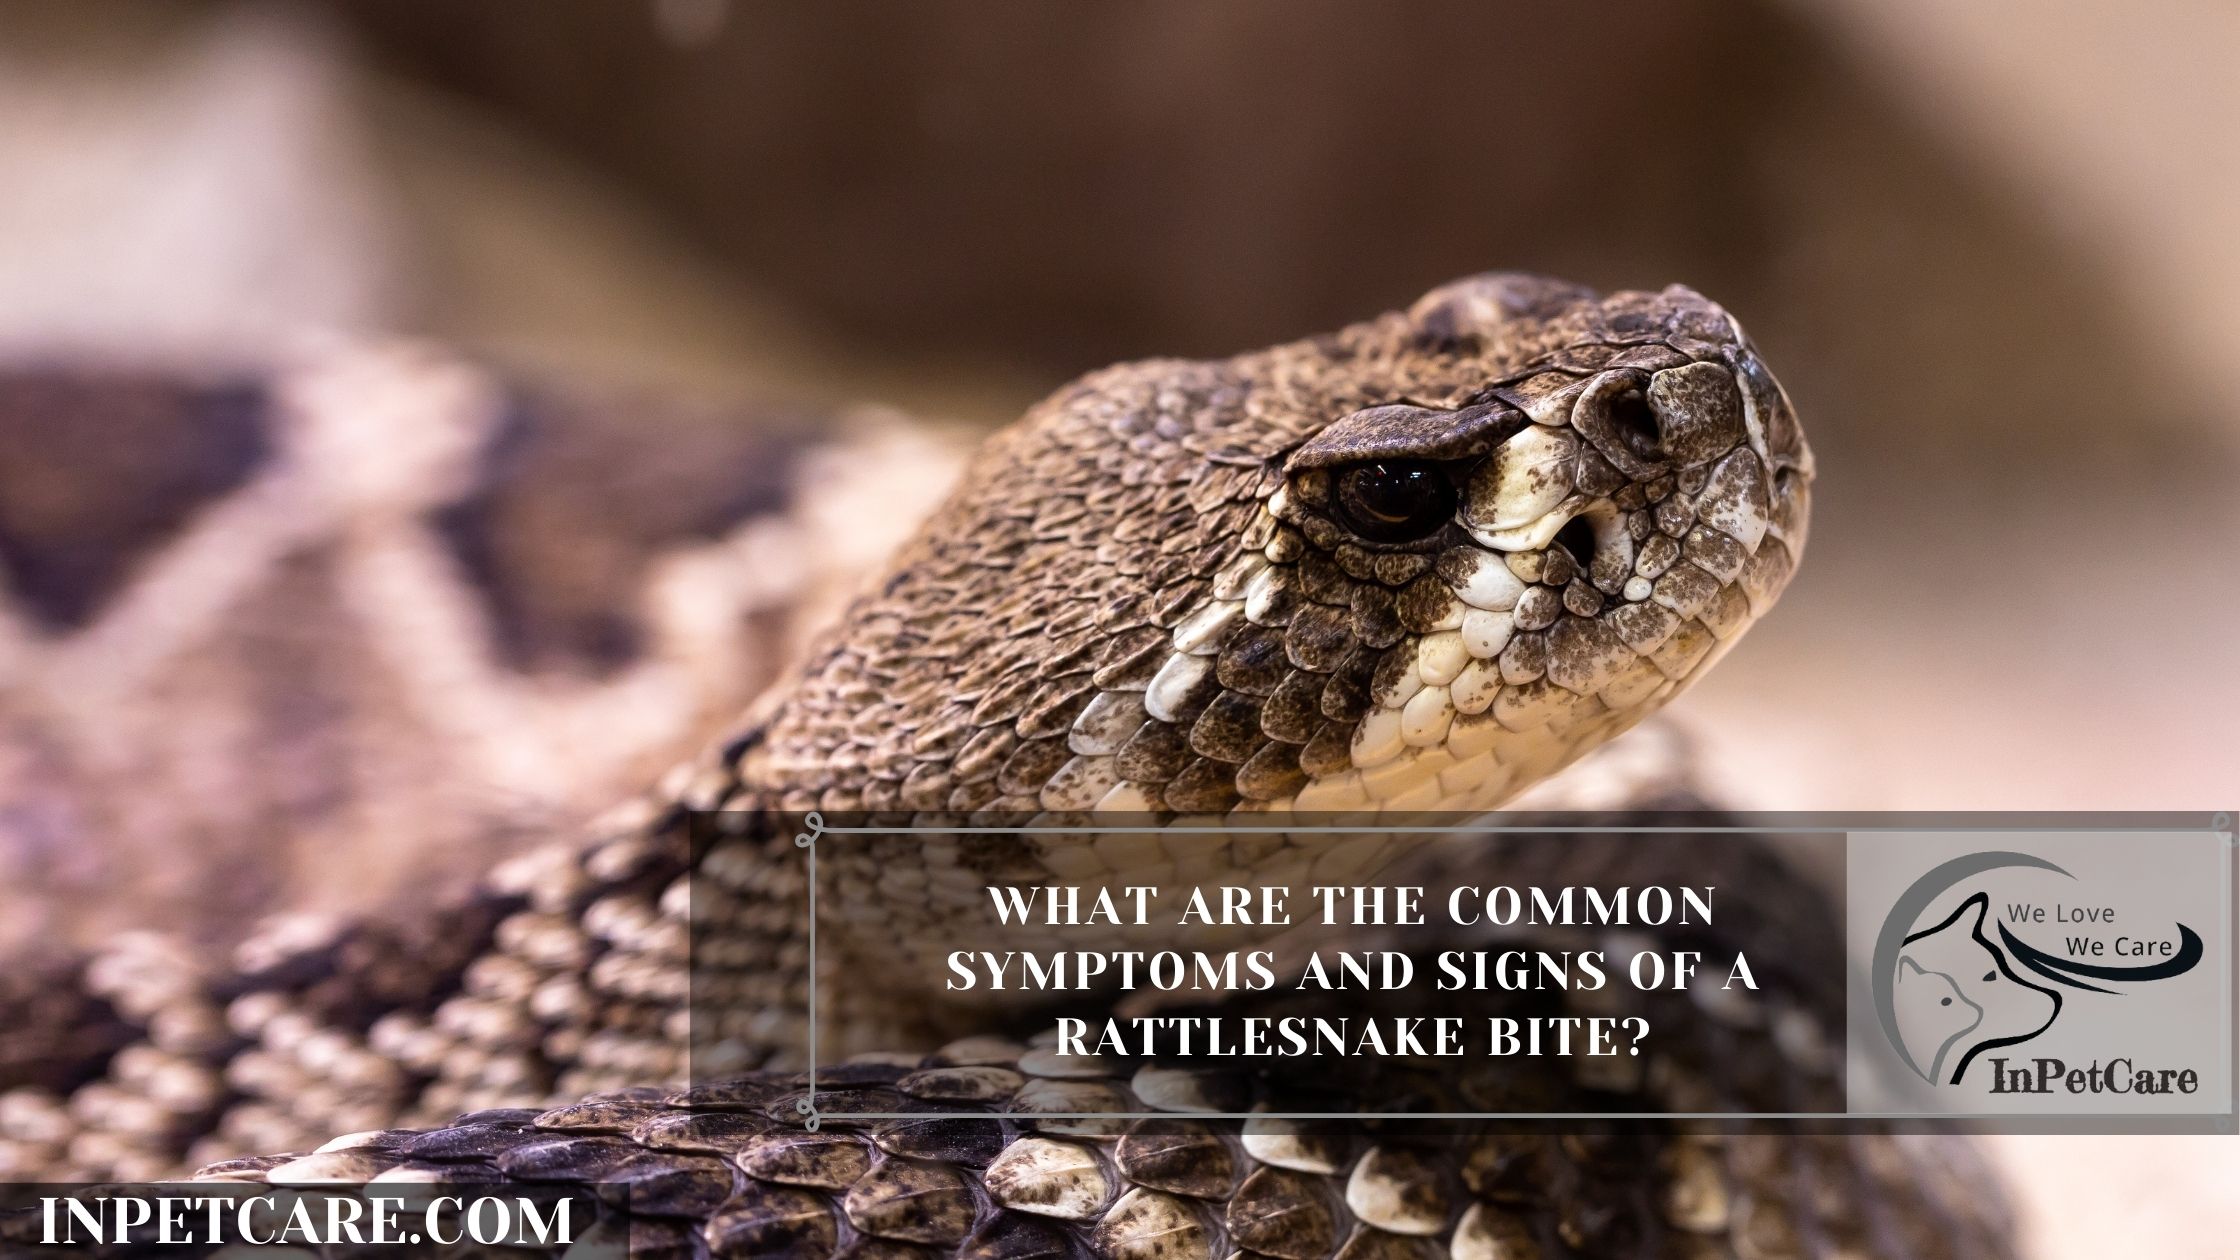 What are the common Symptoms and Signs of a Rattlesnake bite?